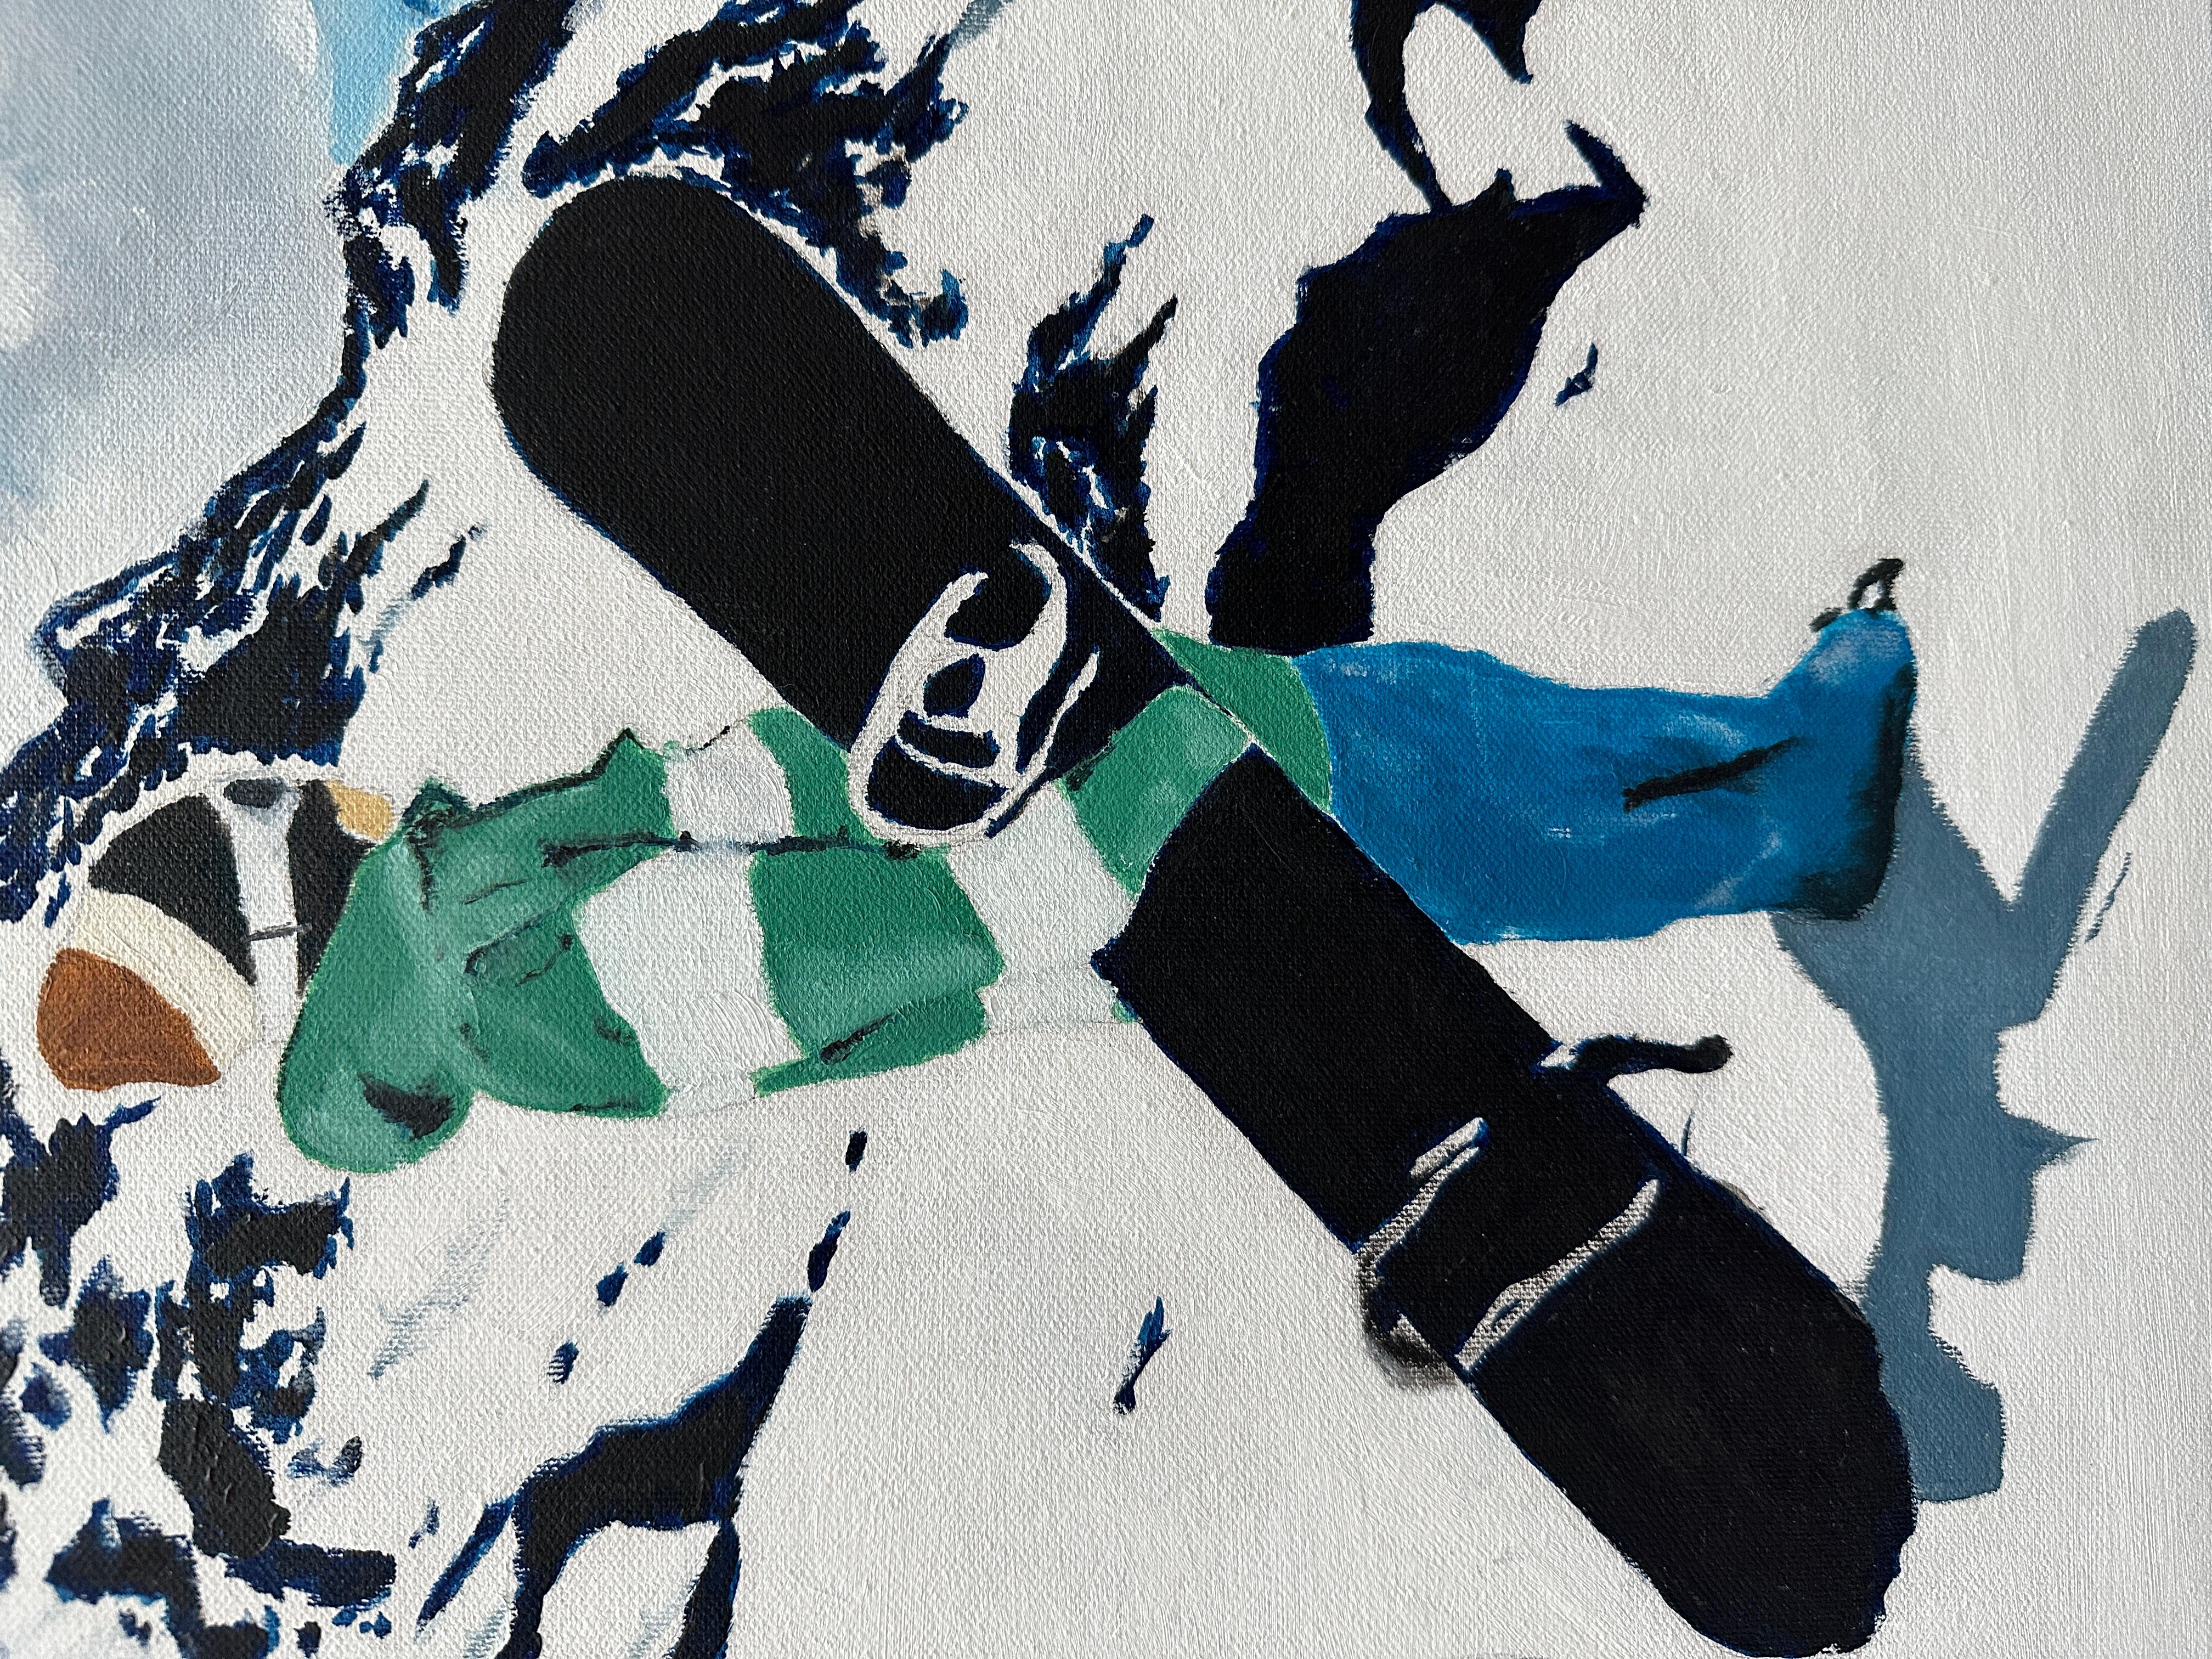 Canadian Snowboarder - Painting by Joe McMackin